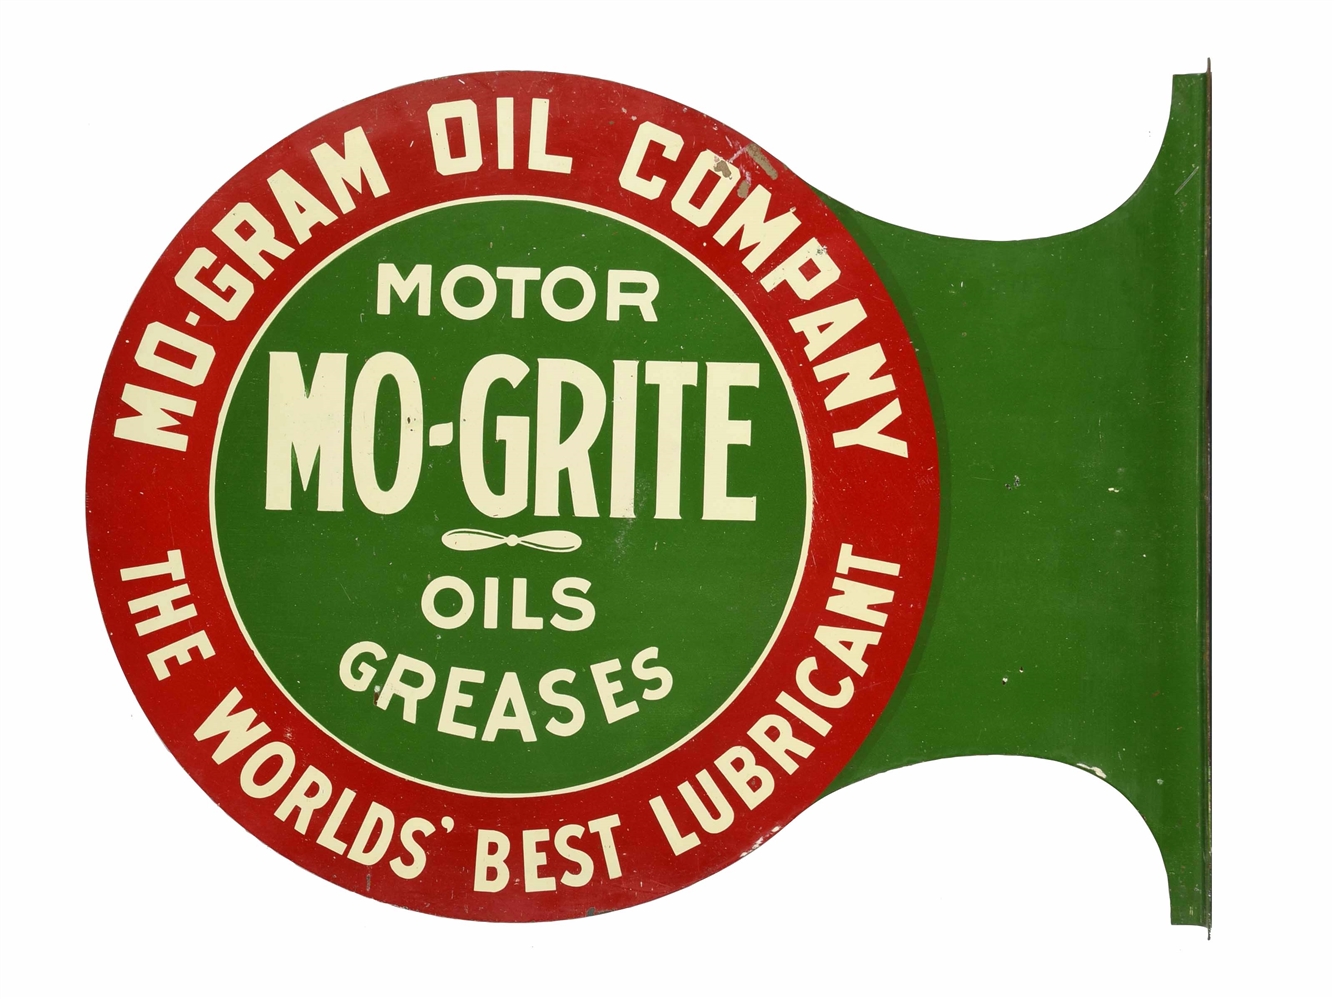 MO-GRITE OILS GREASE TIN FLANGE SIGN.             